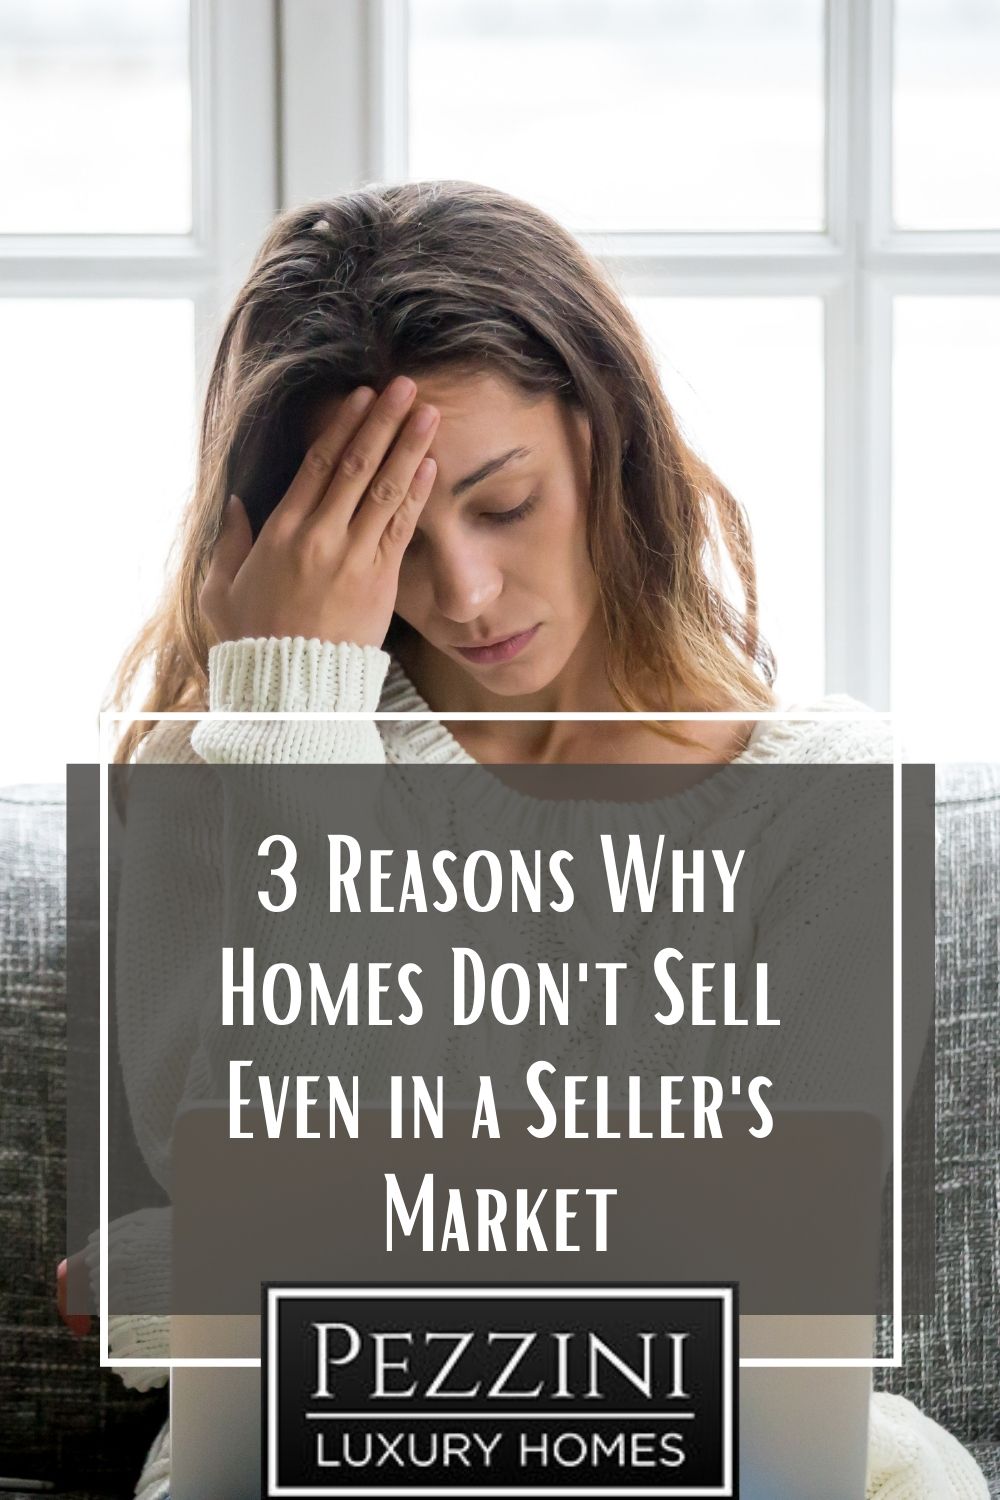 3 Reasons Why Homes Don't Sell Even in a Seller's Market